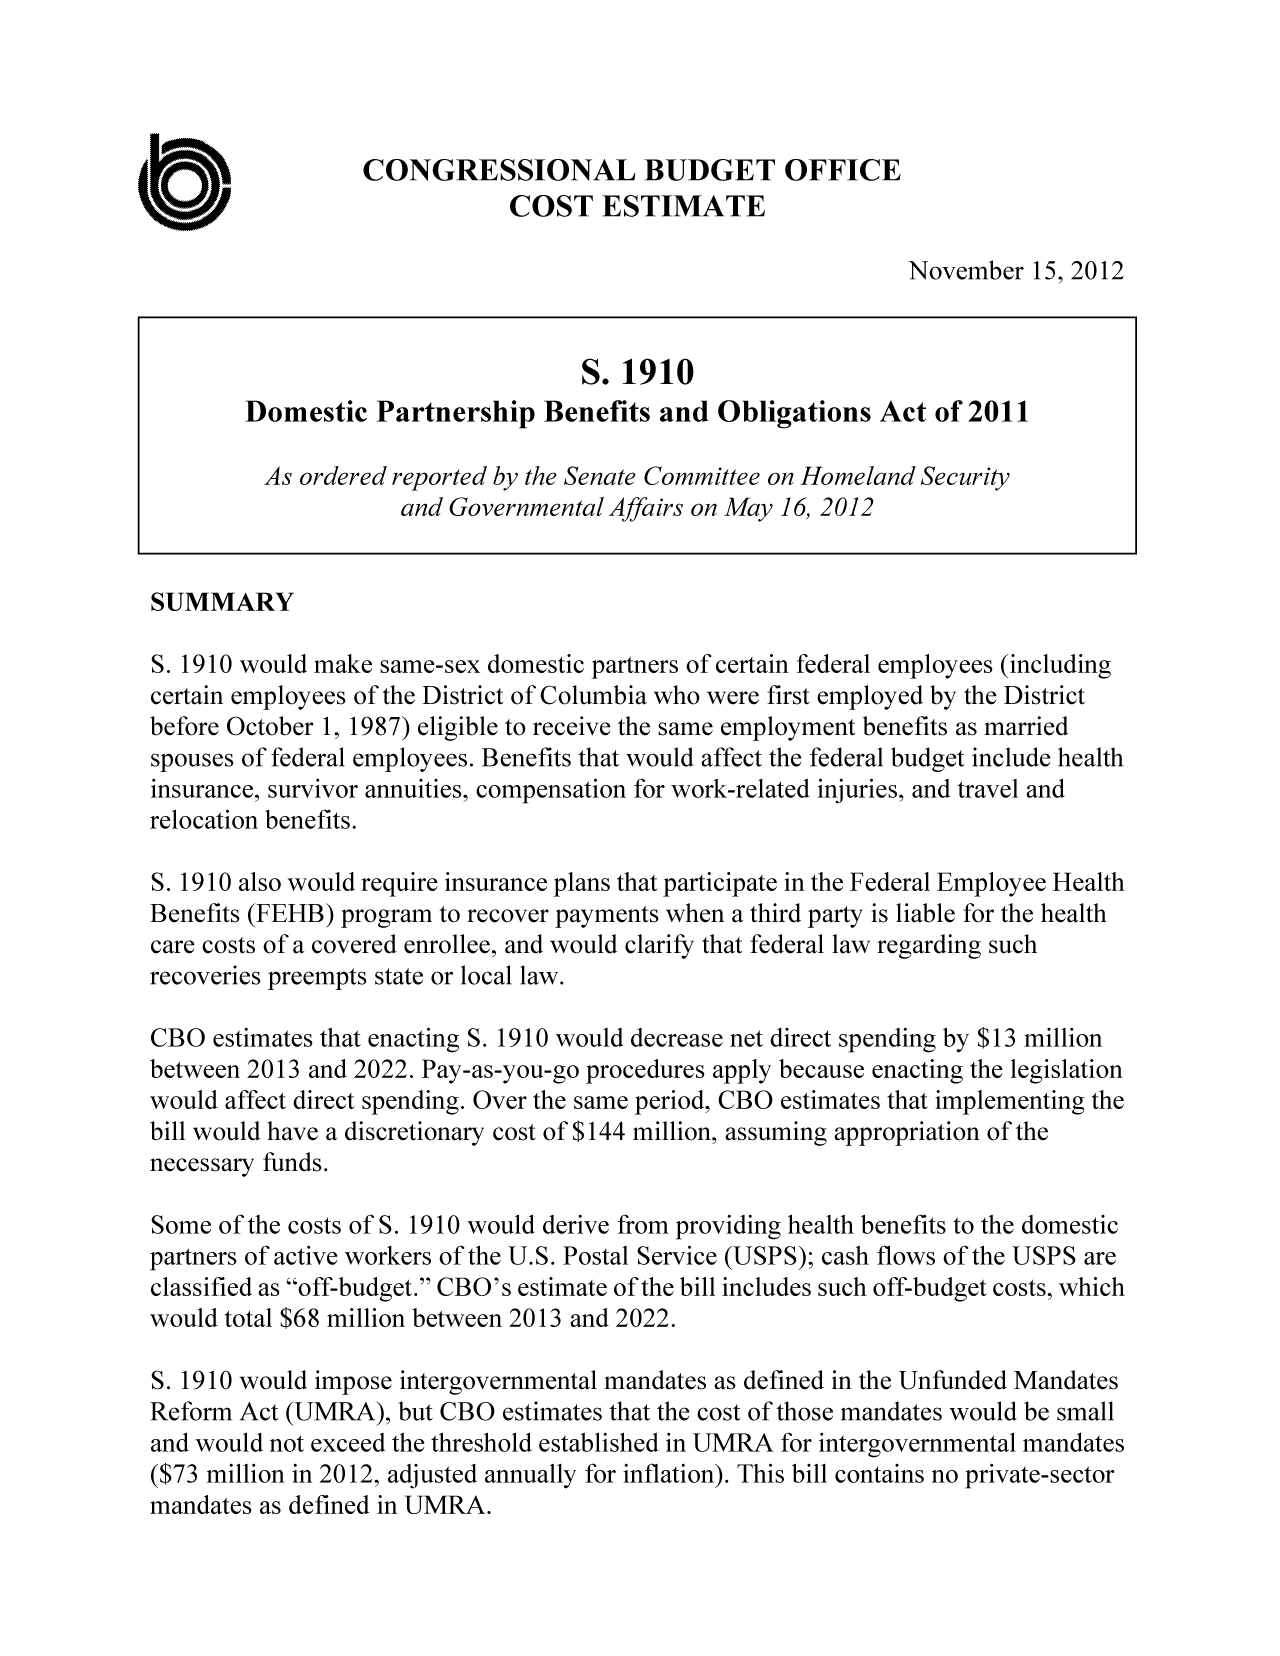 handle is hein.congrec/cbo10941 and id is 1 raw text is: CONGRESSIONAL BUDGET OFFICE
COST ESTIMATE
November 15, 2012
S. 1910
Domestic Partnership Benefits and Obligations Act of 2011
As ordered reported by the Senate Committee on Homeland Security
and Governmental Affairs on May 16, 2012
SUMMARY
S. 1910 would make same-sex domestic partners of certain federal employees (including
certain employees of the District of Columbia who were first employed by the District
before October 1, 1987) eligible to receive the same employment benefits as married
spouses of federal employees. Benefits that would affect the federal budget include health
insurance, survivor annuities, compensation for work-related injuries, and travel and
relocation benefits.
S. 1910 also would require insurance plans that participate in the Federal Employee Health
Benefits (FEHB) program to recover payments when a third party is liable for the health
care costs of a covered enrollee, and would clarify that federal law regarding such
recoveries preempts state or local law.
CBO estimates that enacting S. 1910 would decrease net direct spending by $13 million
between 2013 and 2022. Pay-as-you-go procedures apply because enacting the legislation
would affect direct spending. Over the same period, CBO estimates that implementing the
bill would have a discretionary cost of $144 million, assuming appropriation of the
necessary funds.
Some of the costs of S. 1910 would derive from providing health benefits to the domestic
partners of active workers of the U.S. Postal Service (USPS); cash flows of the USPS are
classified as off-budget. CBO's estimate of the bill includes such off-budget costs, which
would total $68 million between 2013 and 2022.
5. 1910 would impose intergovernmental mandates as defined in the Unfunded Mandates
Reform Act (UMRA), but CBO estimates that the cost of those mandates would be small
and would not exceed the threshold established in UMRA for intergovernmental mandates
($73 million in 2012, adjusted annually for inflation). This bill contains no private-sector
mandates as defined in UMRA.


